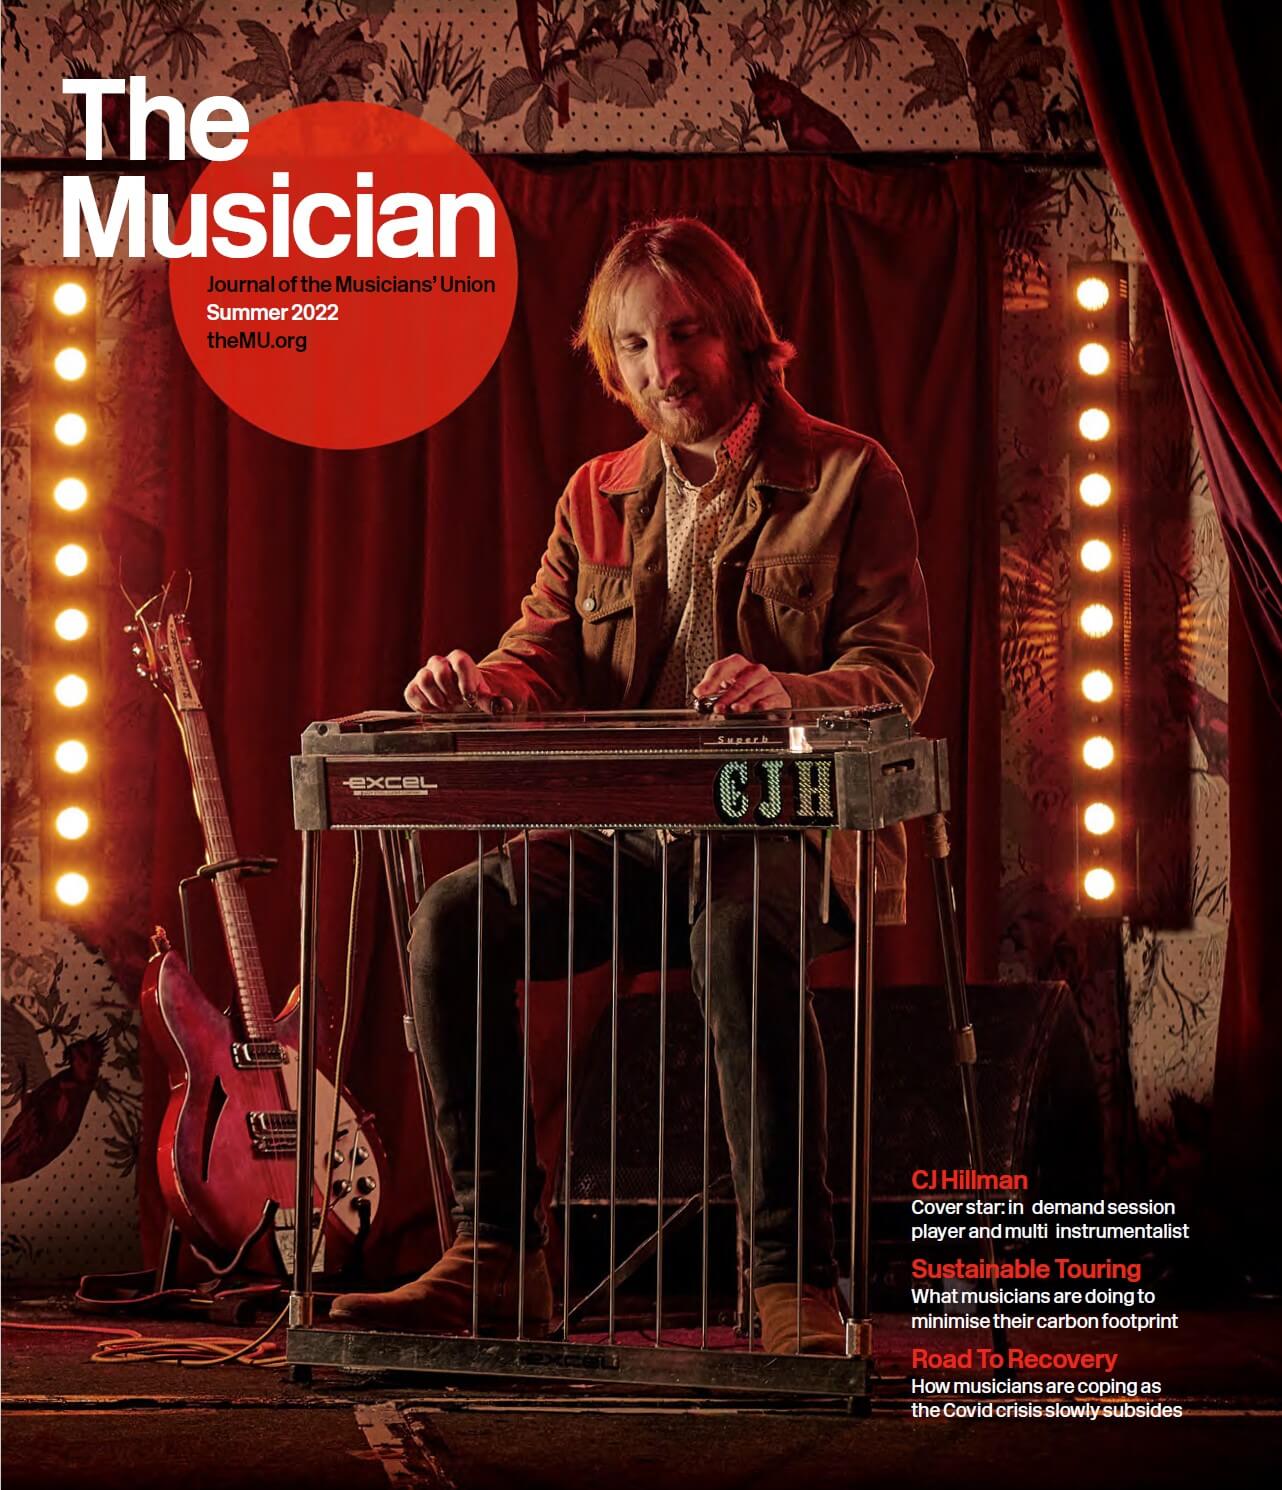 Cover of the Musician Summer 2022 edition featuring CJ Hillman